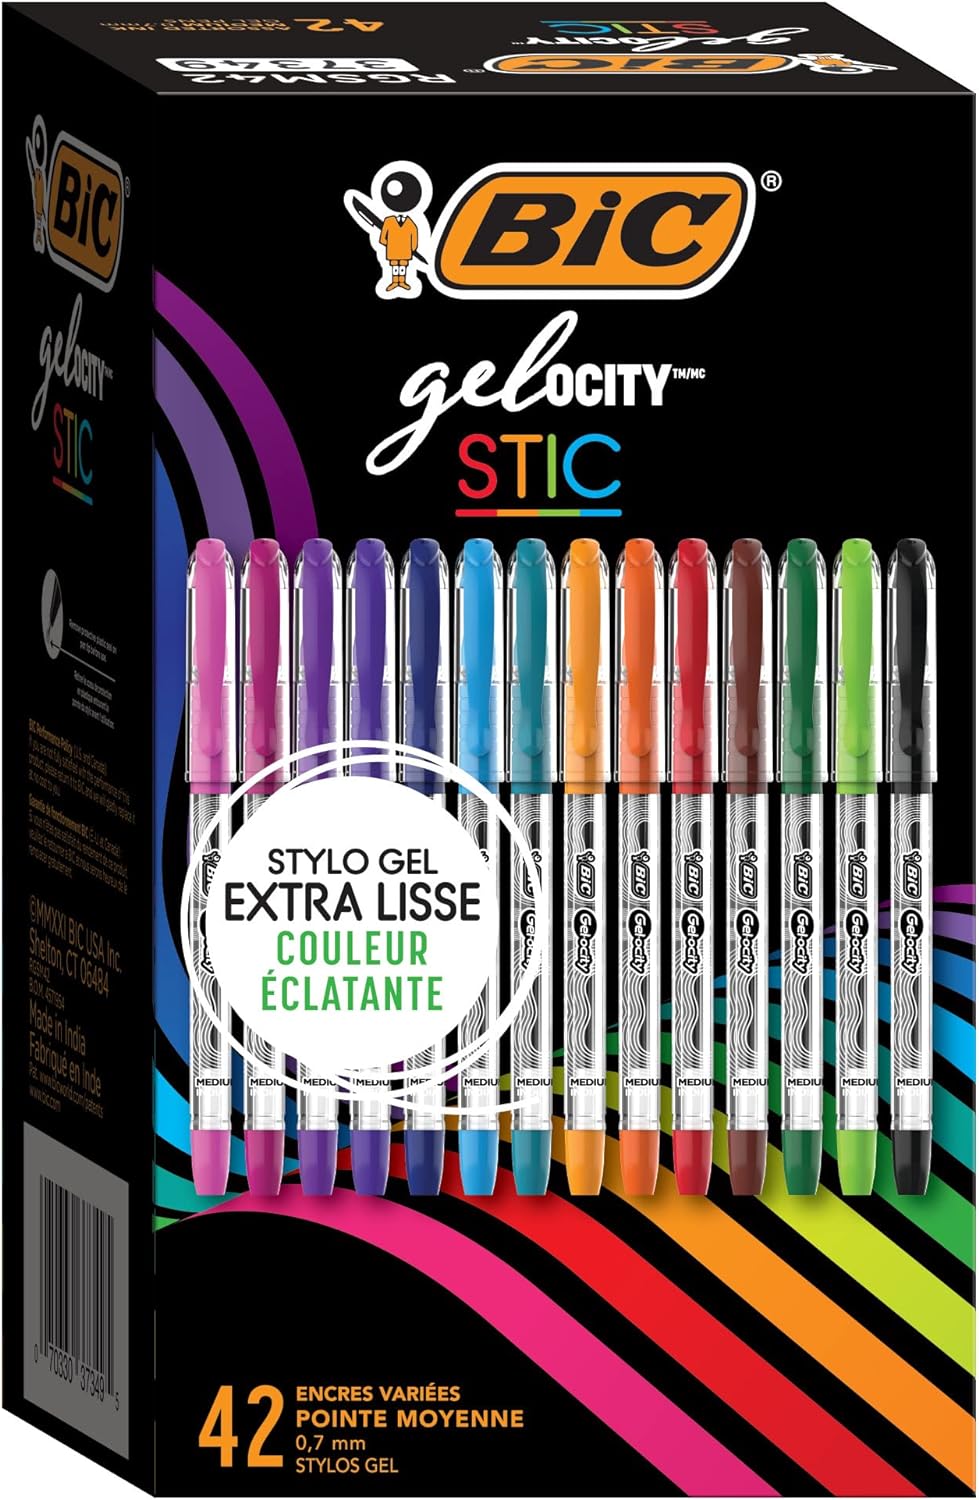 BIC Gel-ocity Gel Stic Assorted Colors Gel Pen Set (RGSM42-AST), Medium Point (0.7mm), 42-Count Pack, Colorful Gel Pens for Journaling and Lists